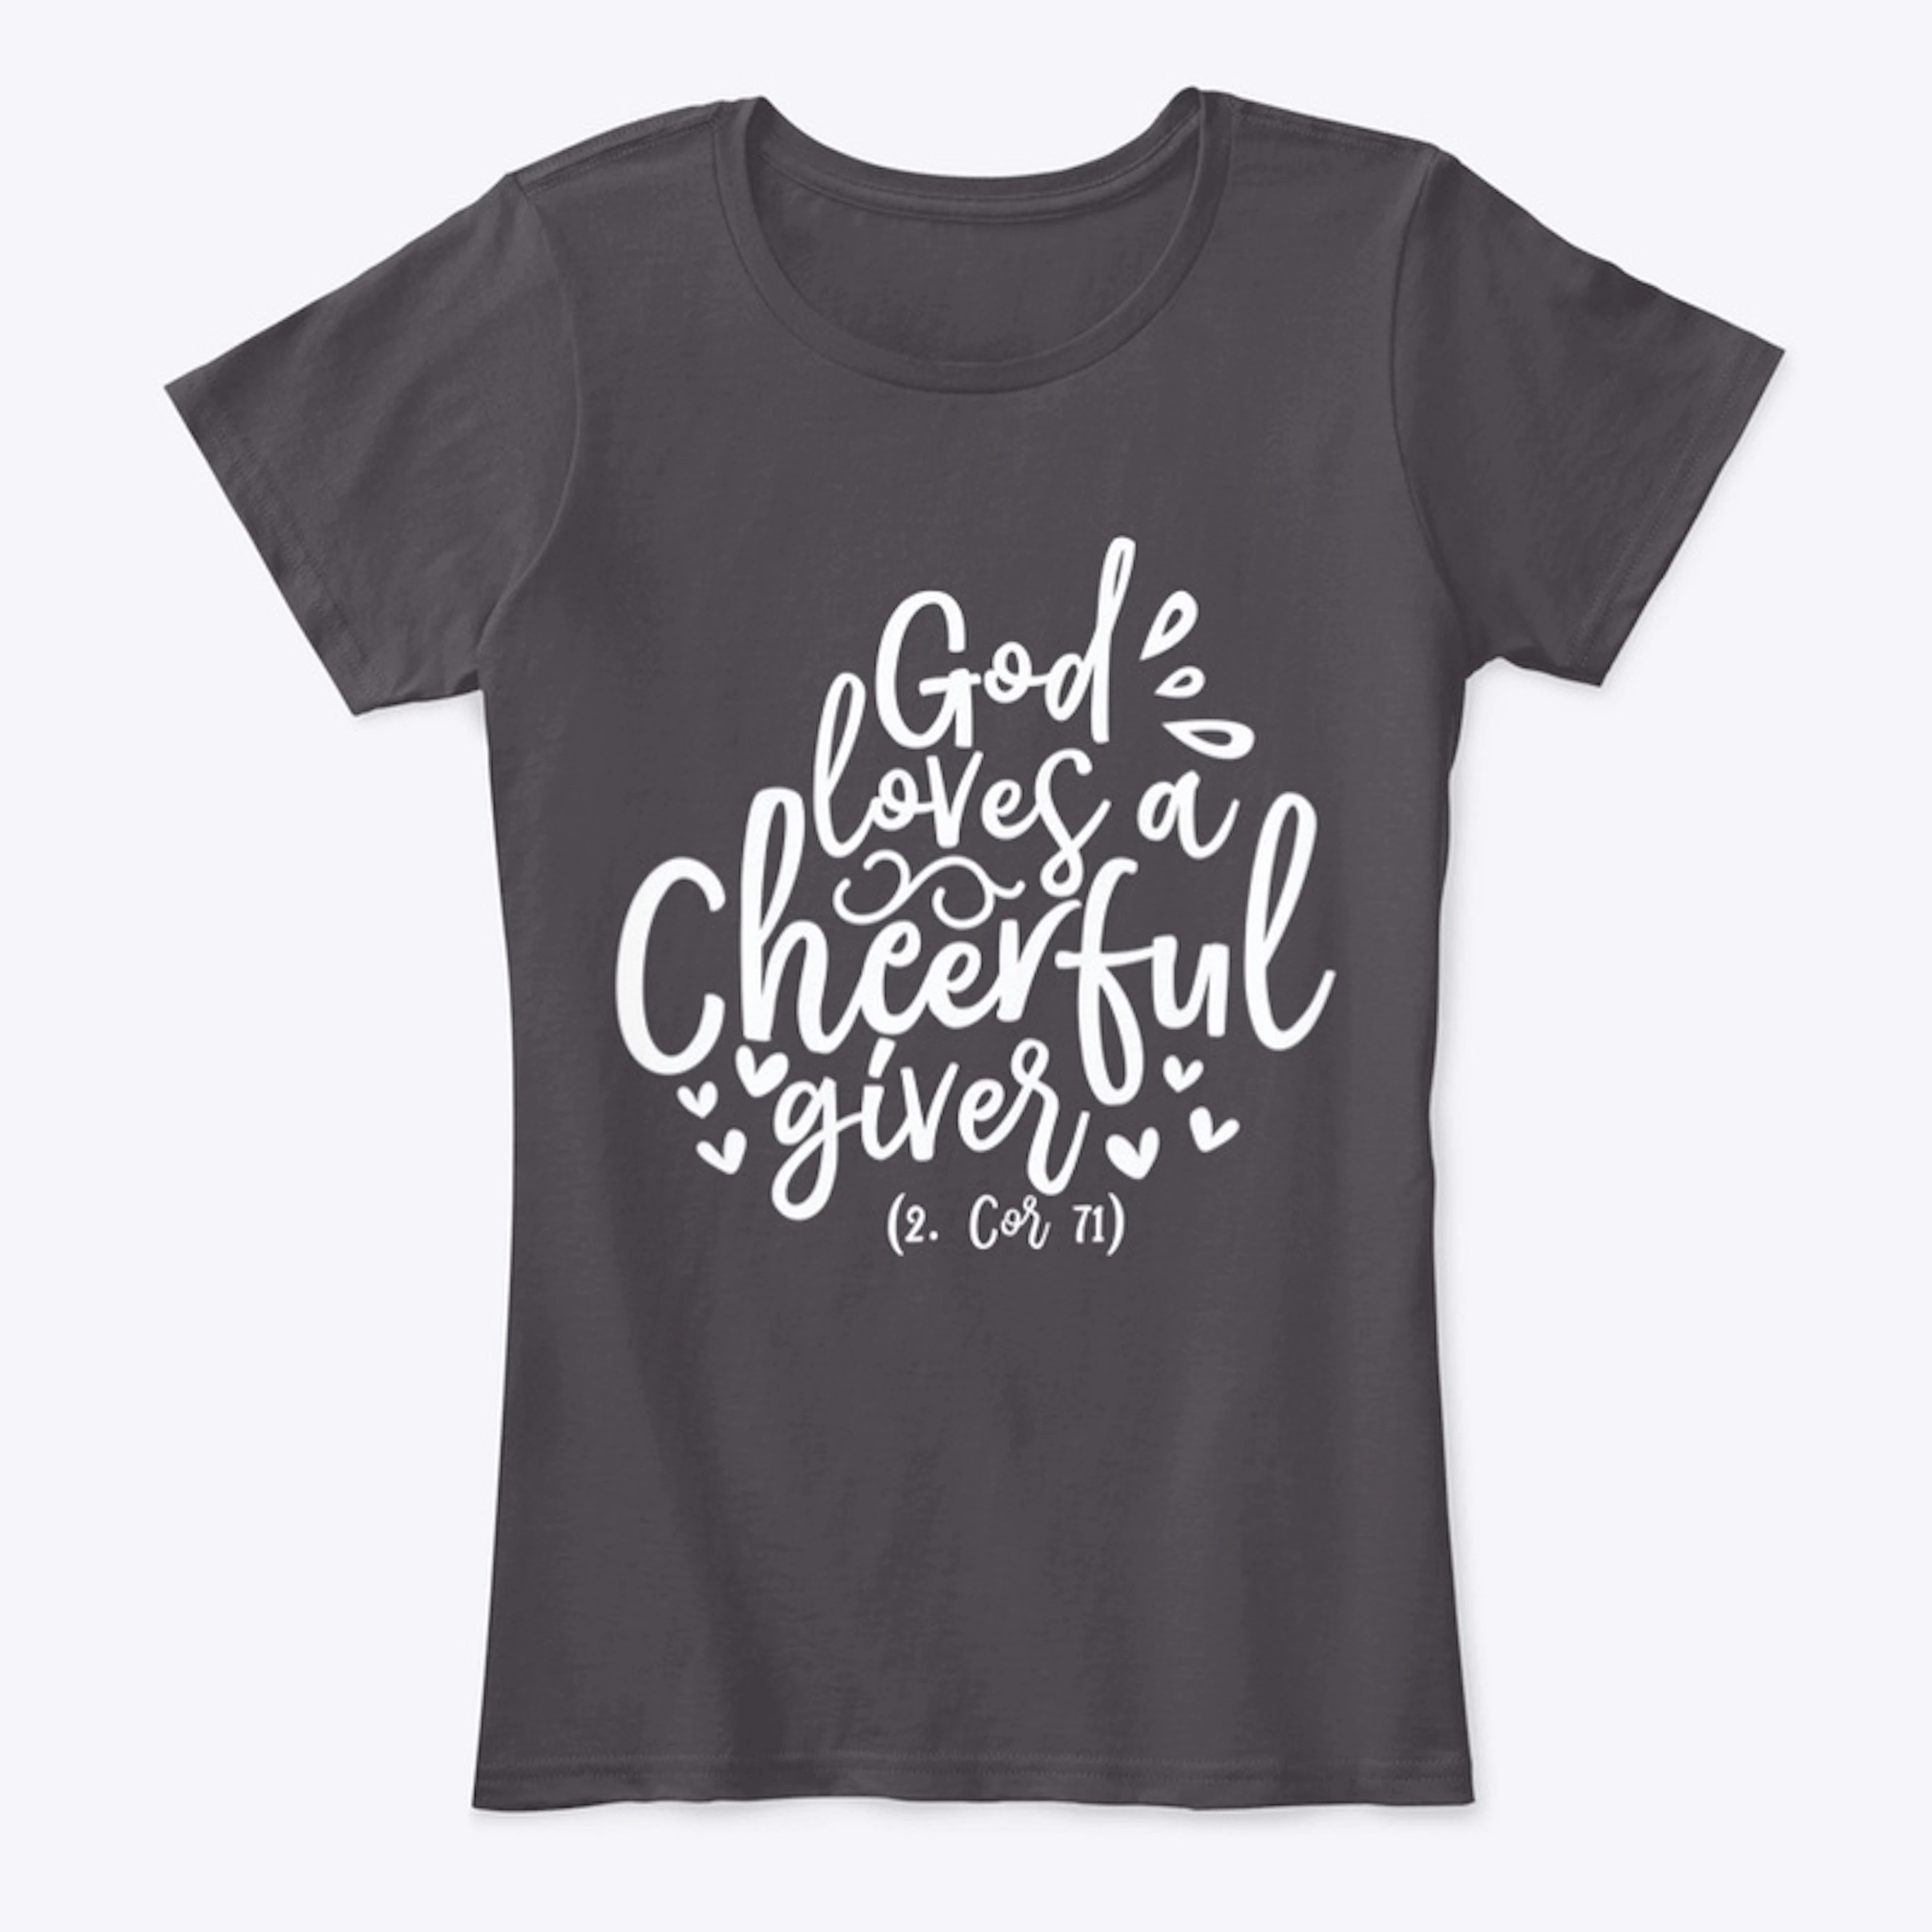 Women's T-Shirt Cheerful Giver